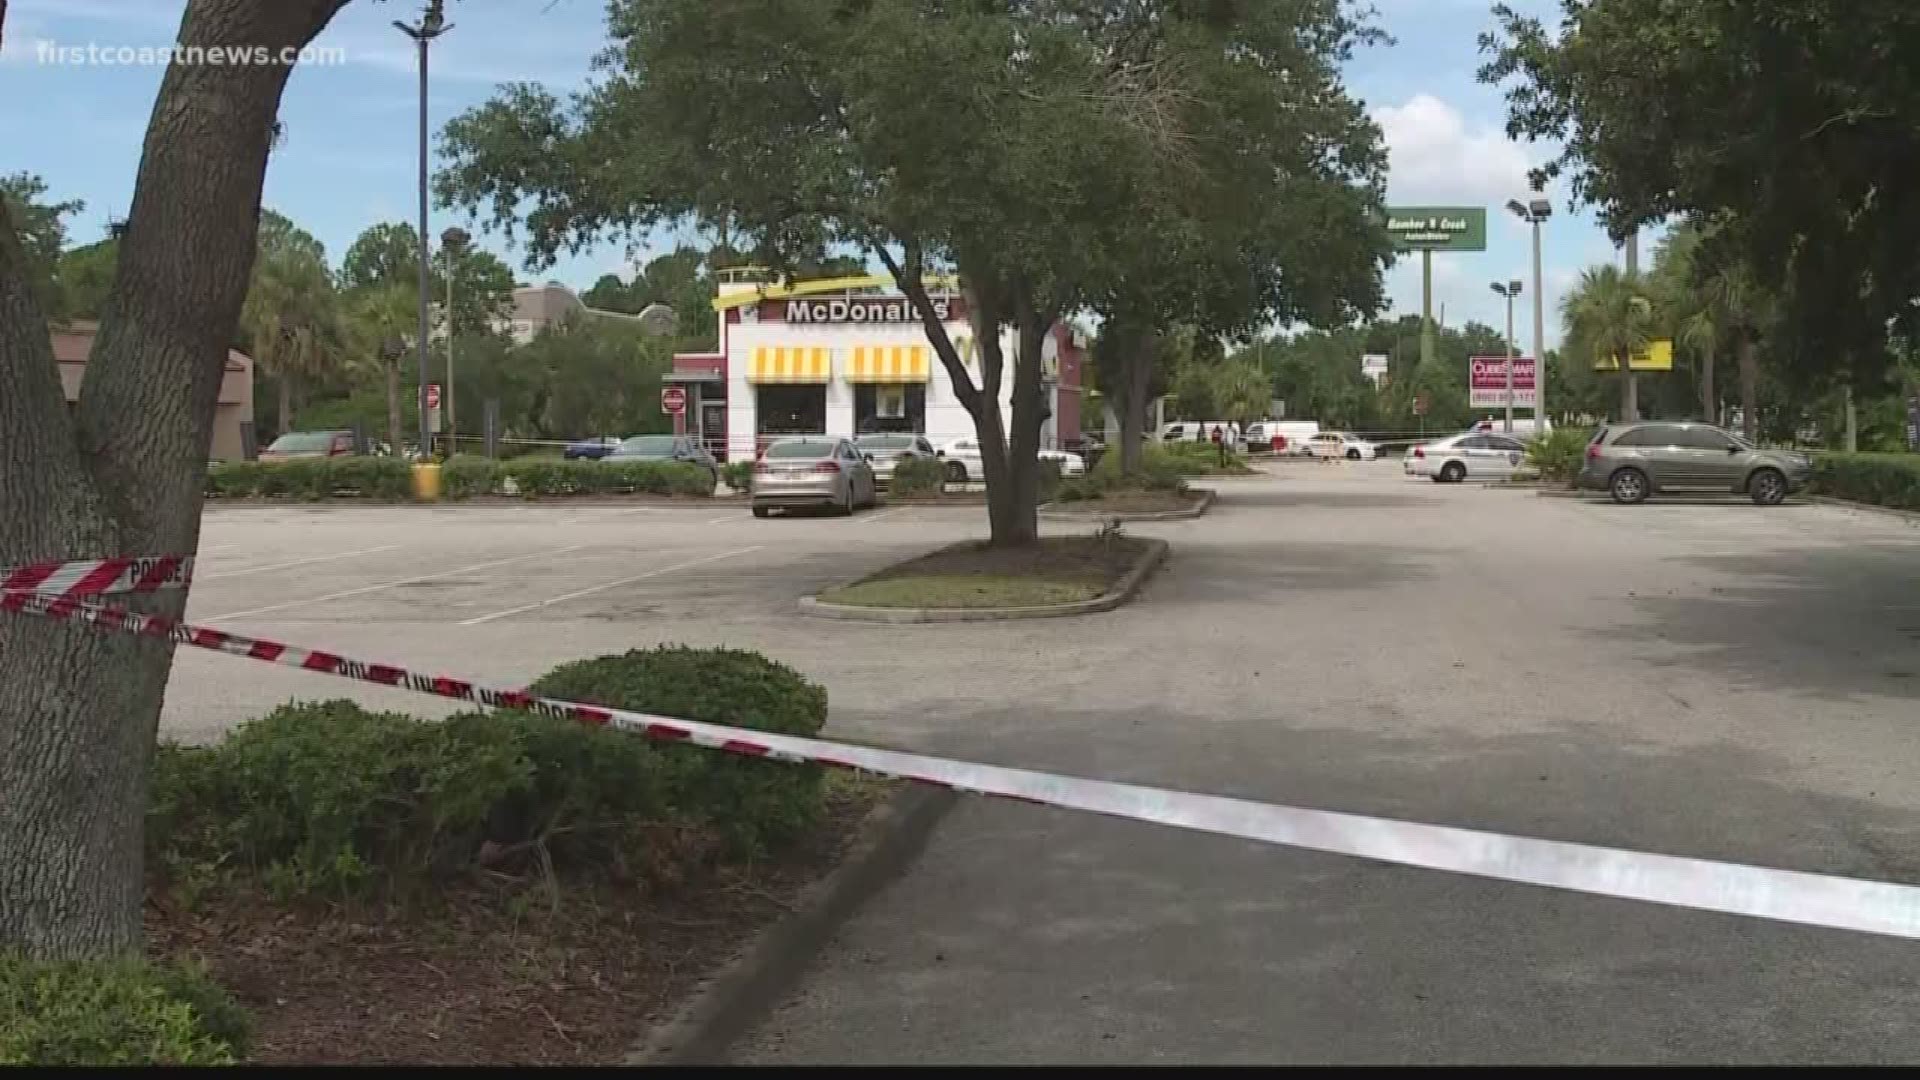 The male suspect fled in a white vehicle headed eastbound on Baymeadows. Police believe, due to the nature of the crime, that the suspect and victim may have known one another, but they are unsure at this time.